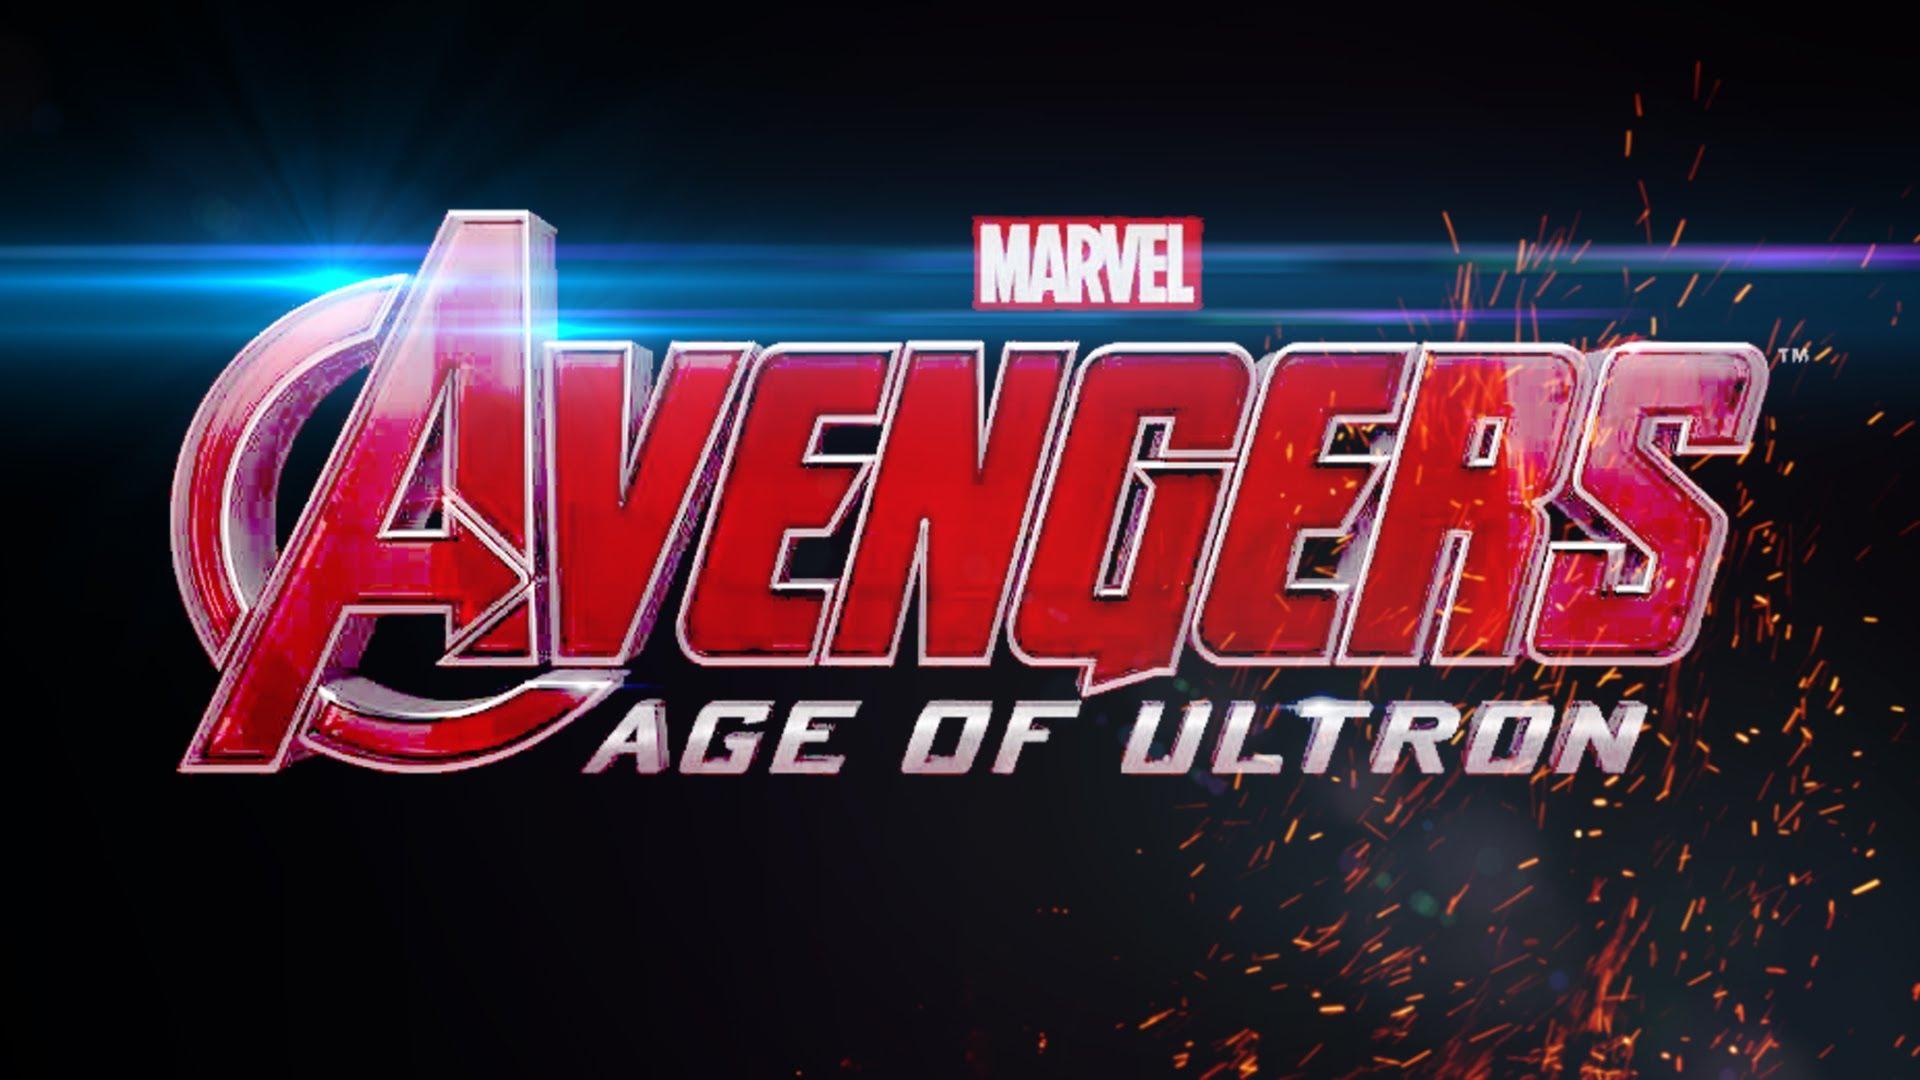 First Marvel Avengers: Age of Ultron trailer leaked